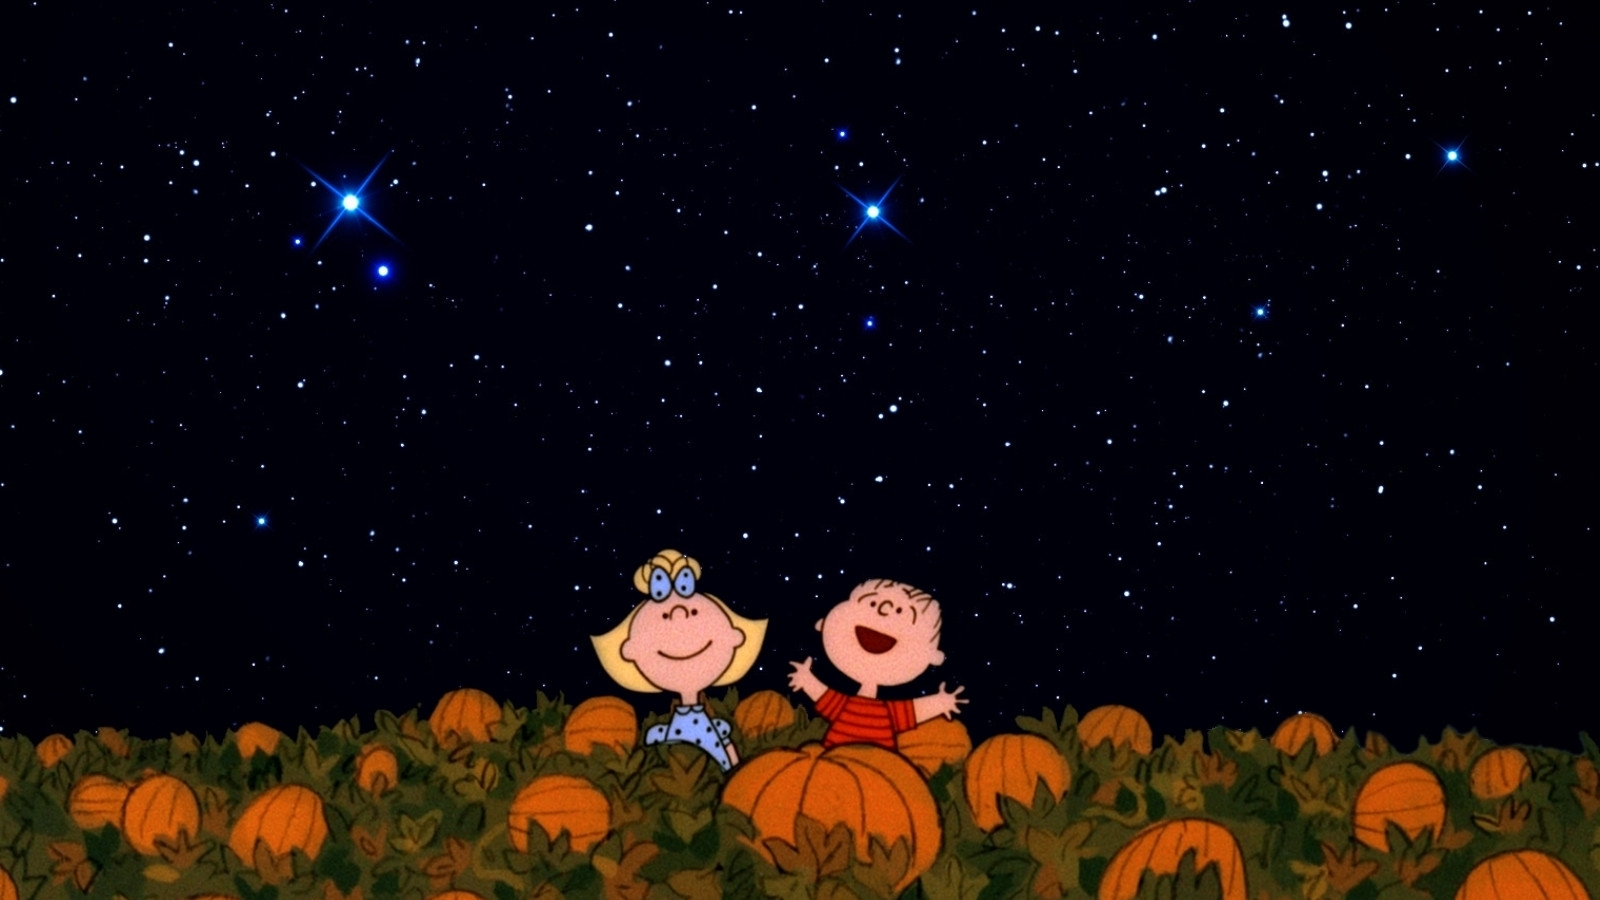 10 Best Charlie Brown Halloween Wallpapers FULL HD 1920×1080 For PC Background